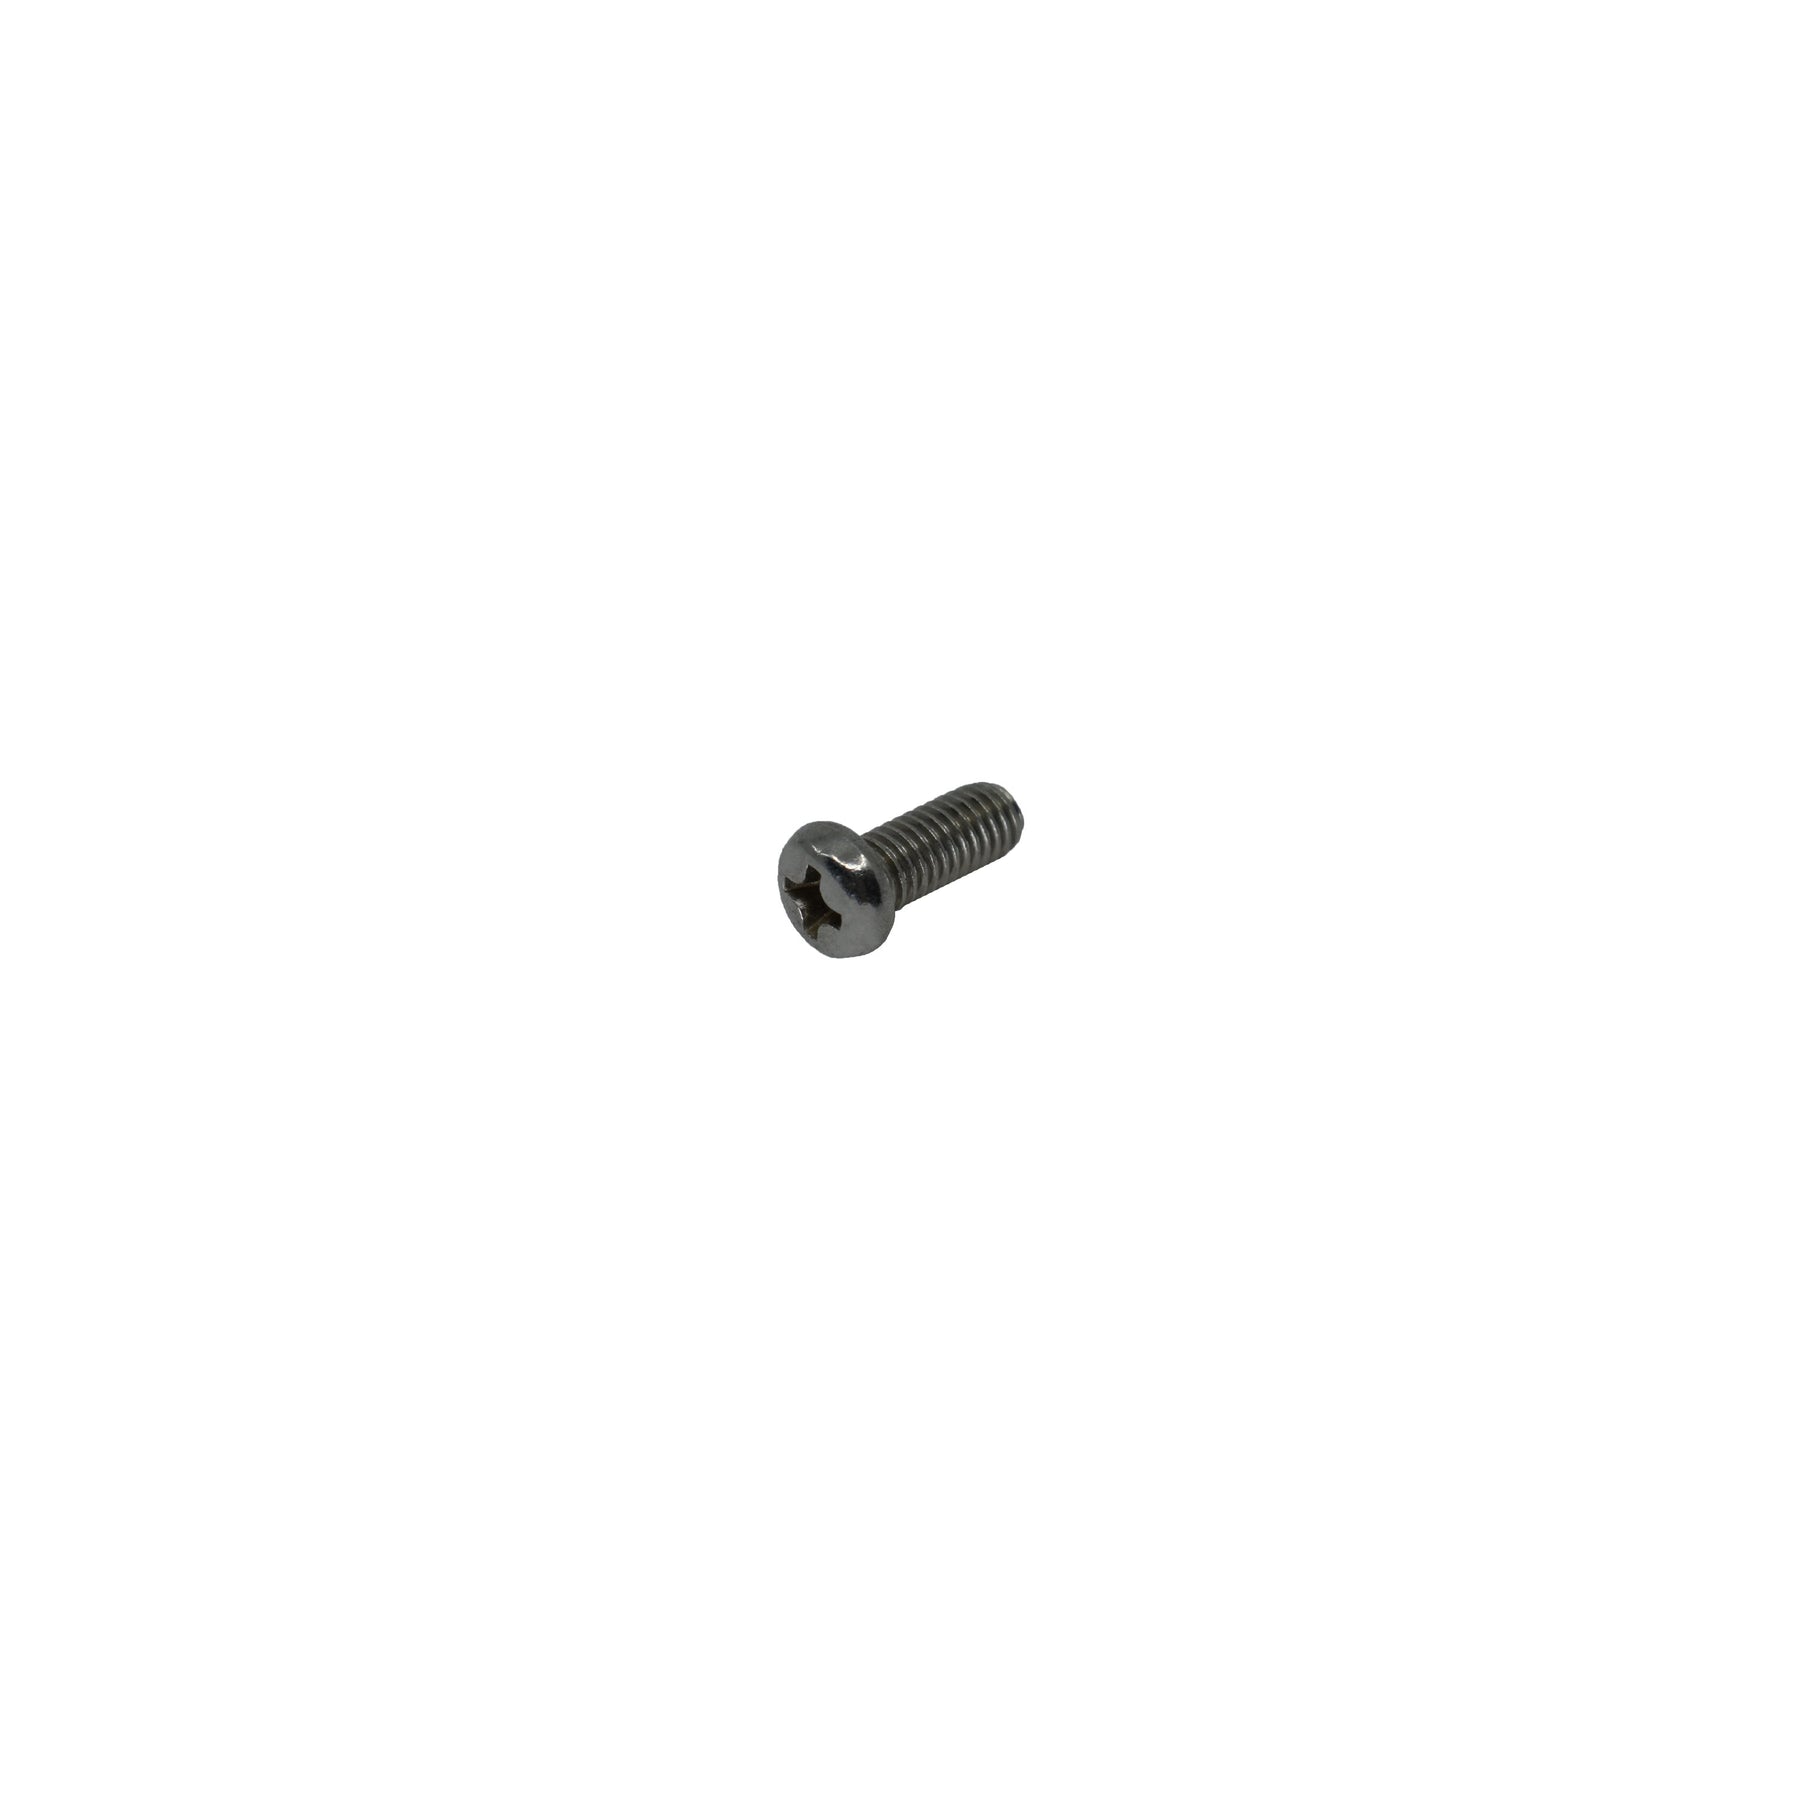 Screw For Floating Fountain With Lights 1 / 4 HP / 1 / 2 HP